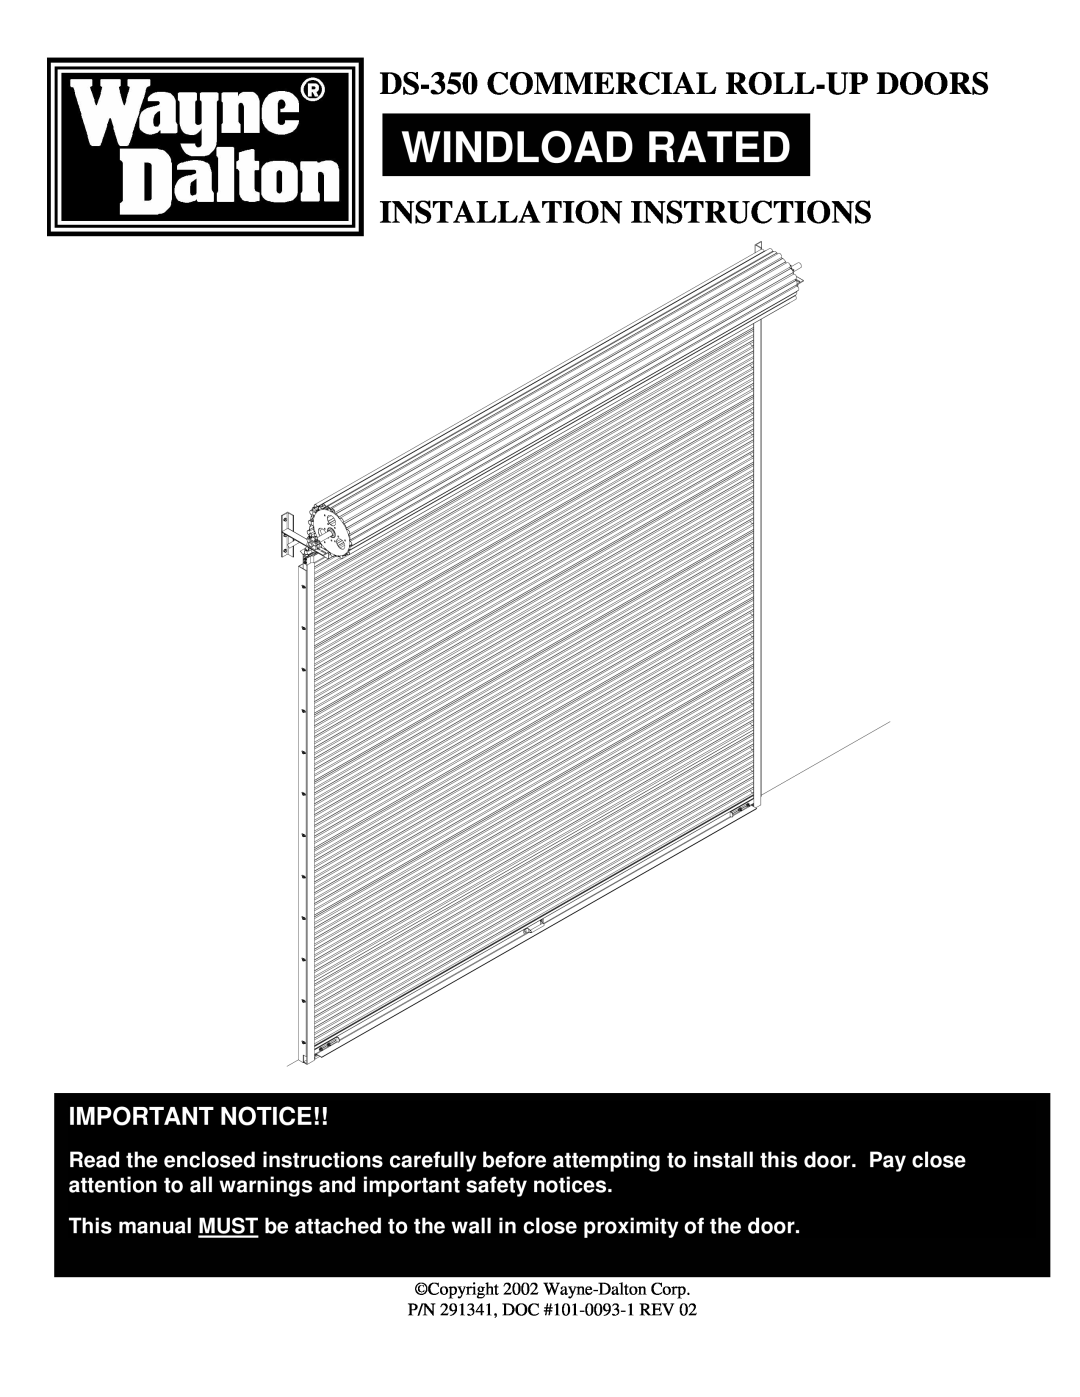 Wayne-Dalton installation instructions Windload Rated, DS-350COMMERCIAL ROLL-UPDOORS, Installation Instructions 